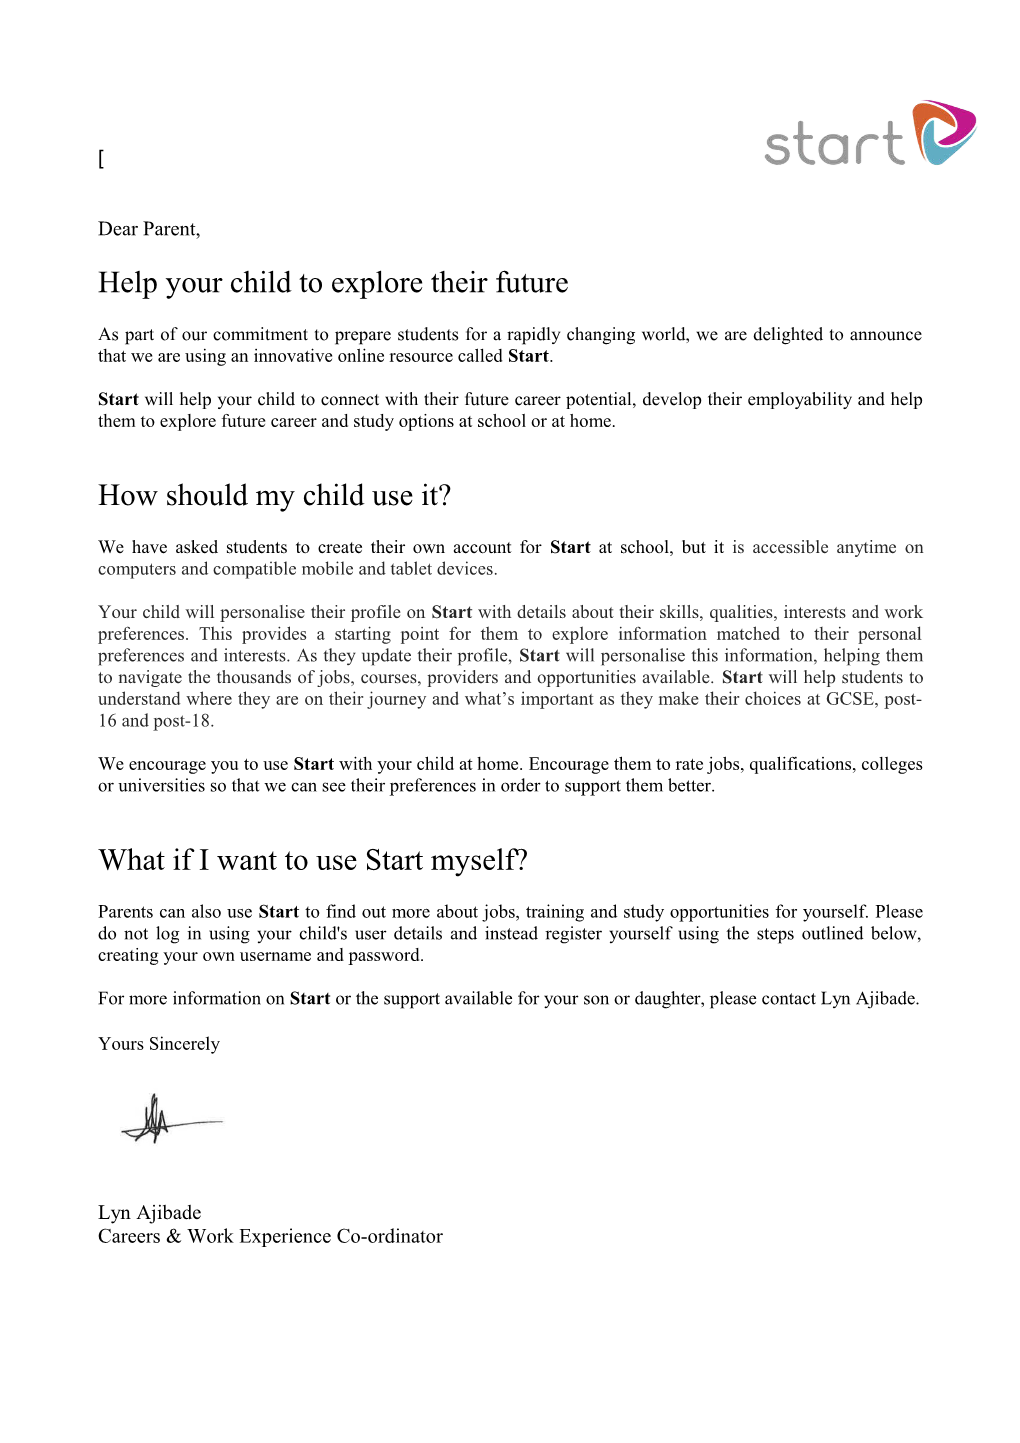 Help Your Child to Explore Their Future